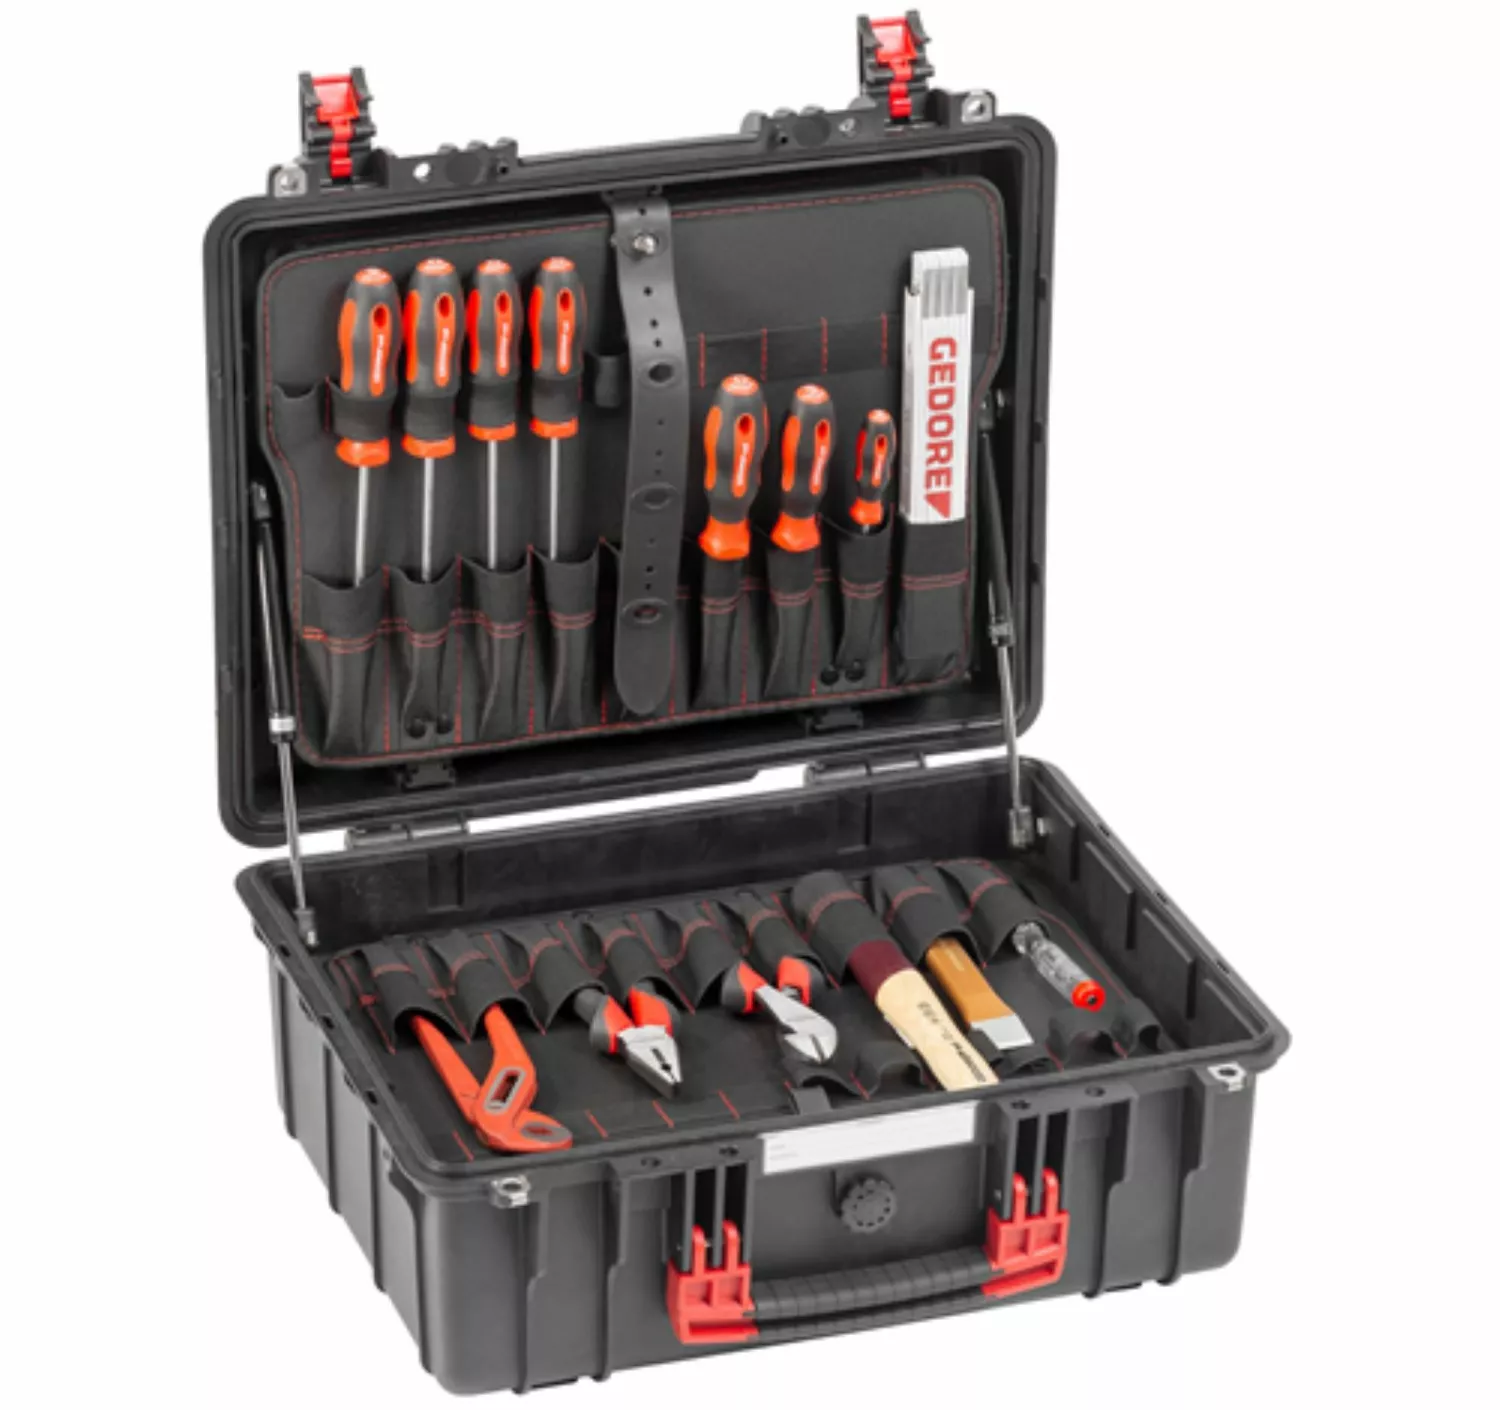 Gedore RED R21652101 - Meister XL tool set in Though Case - 101 pieces-image